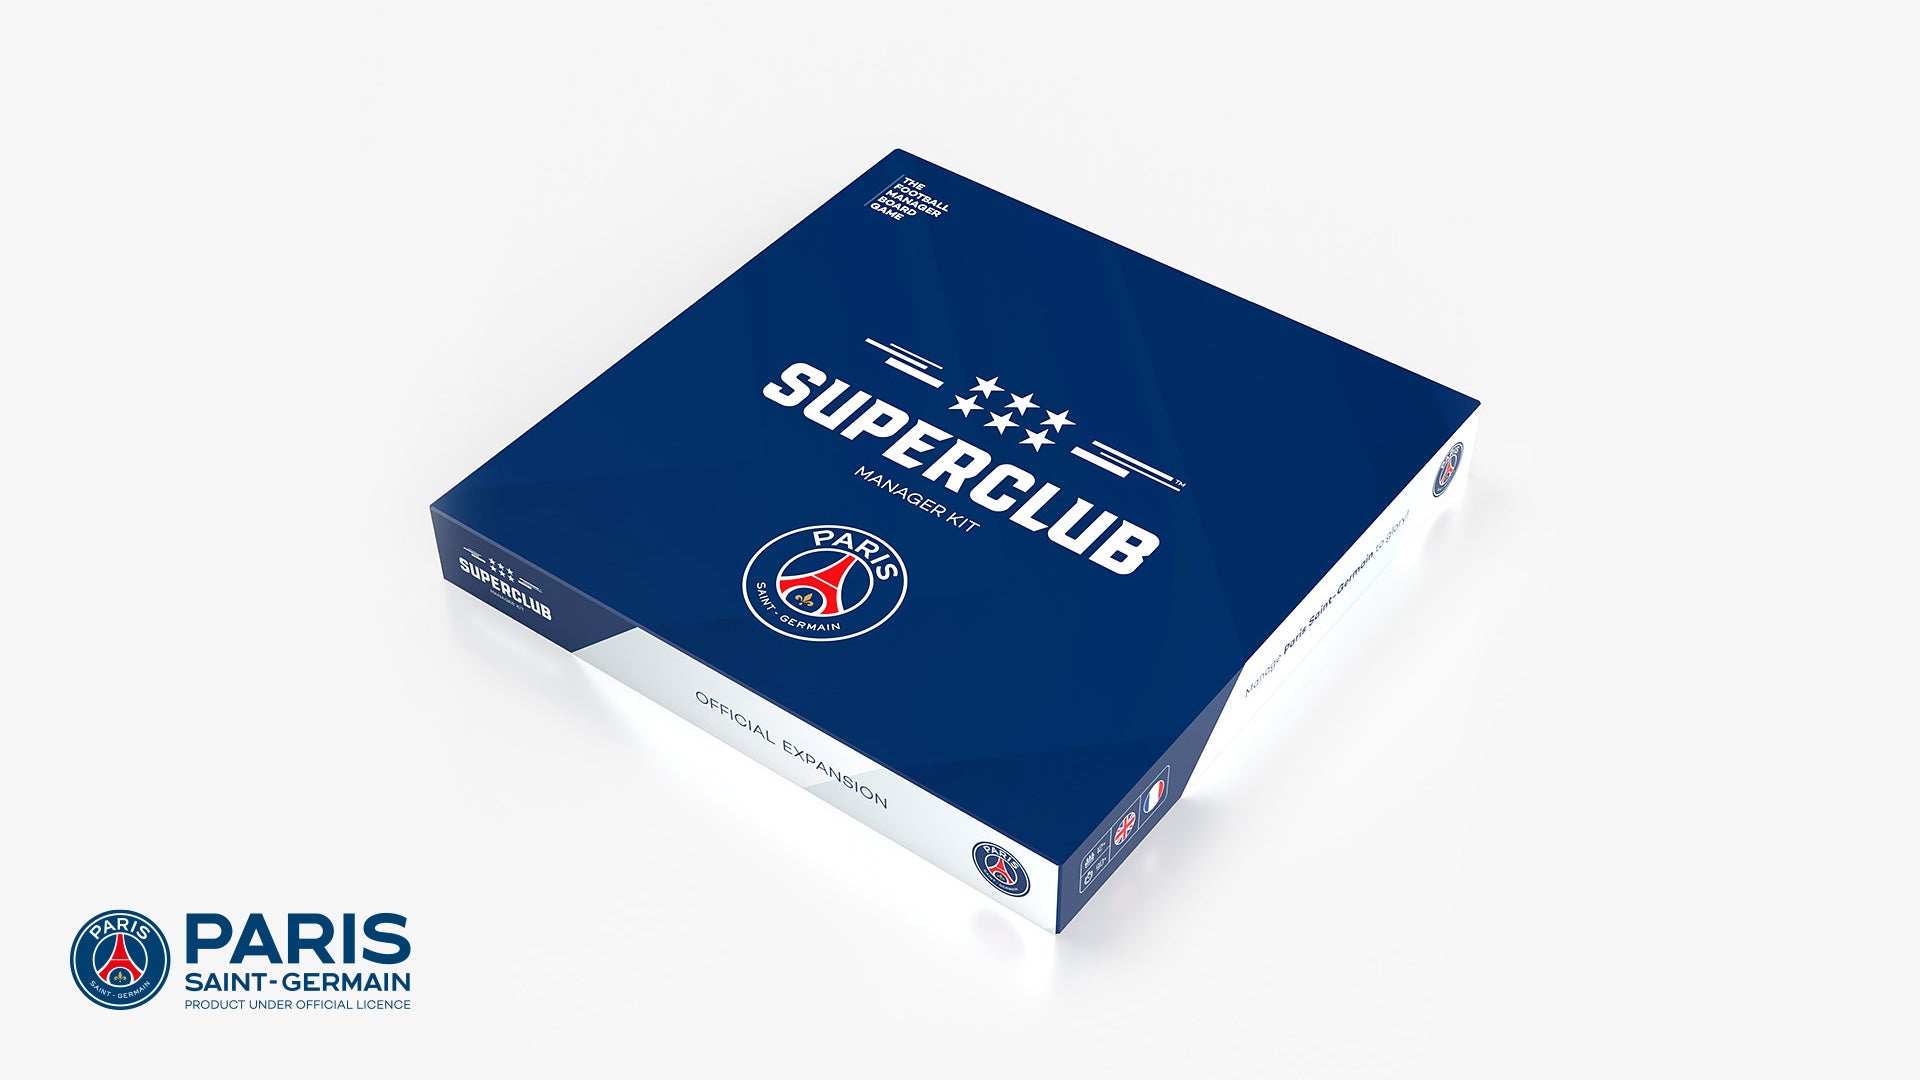 We’re super proud to have PSG as a part of the Superclub family